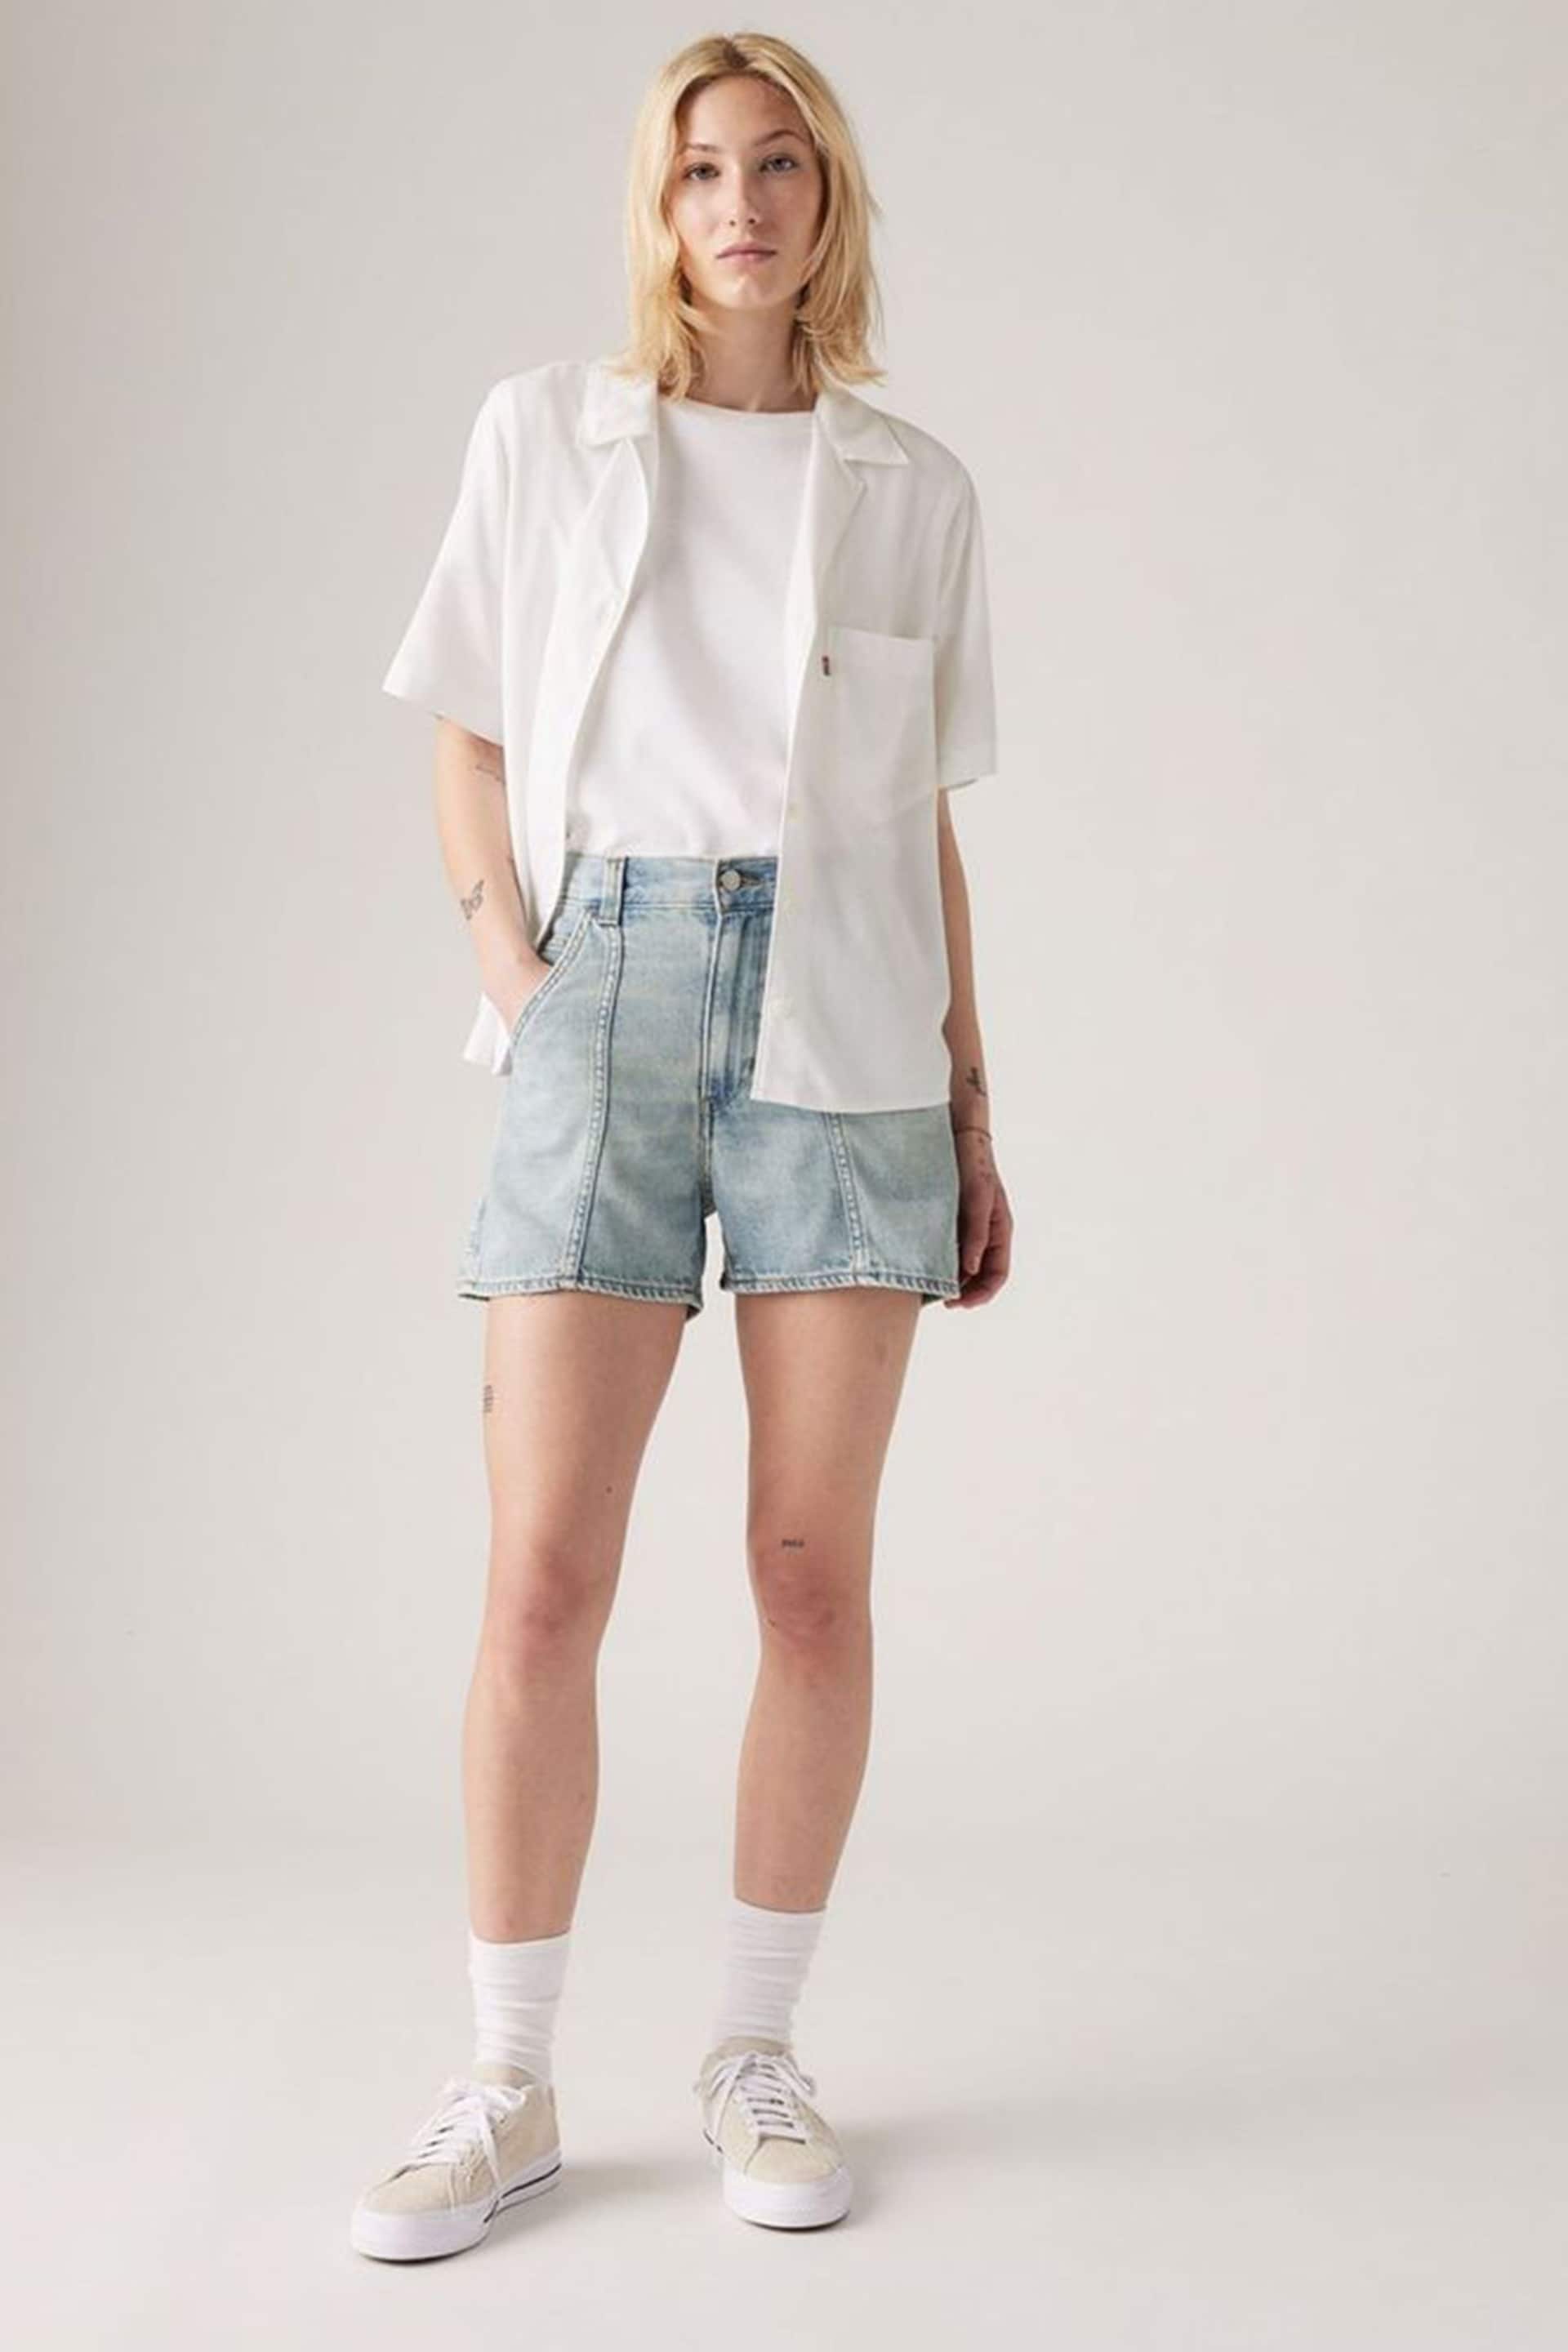 Levi's® Make a Difference Lightweight Carpenter Shorts - Image 1 of 8